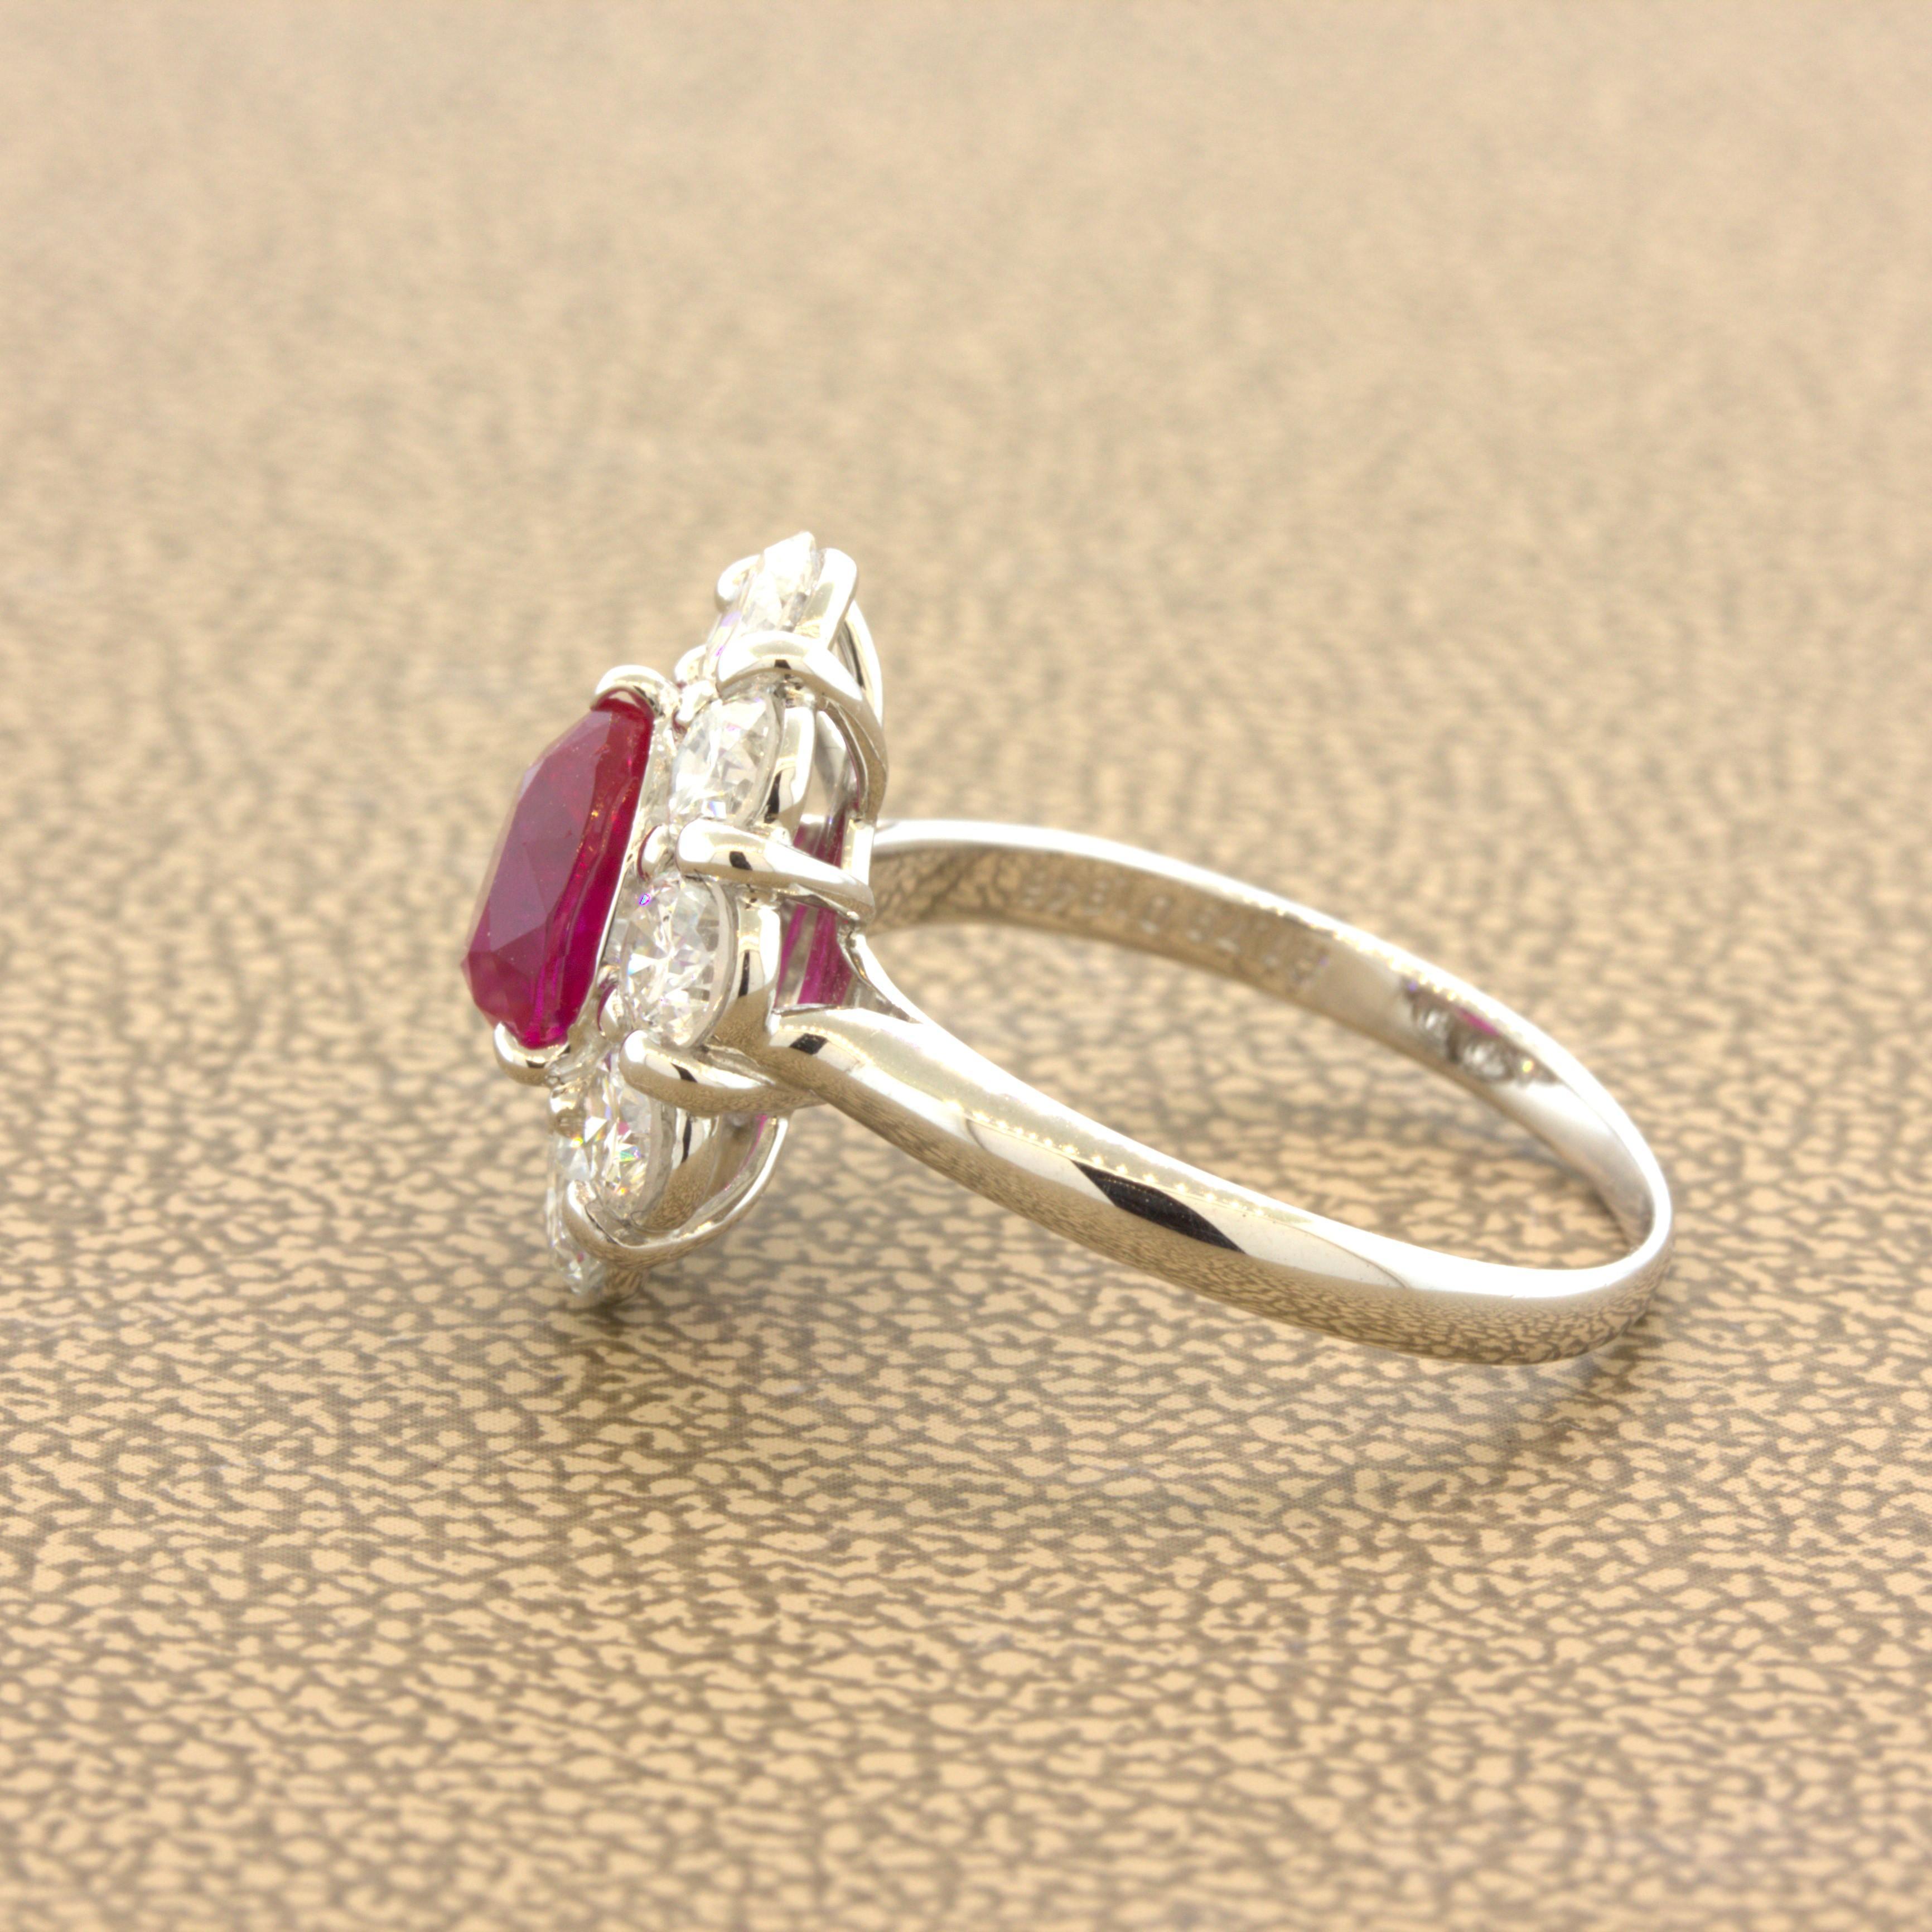 Superb 1.79 Carat Burmese Ruby Diamond Platinum Ring, GIA Certified In New Condition For Sale In Beverly Hills, CA